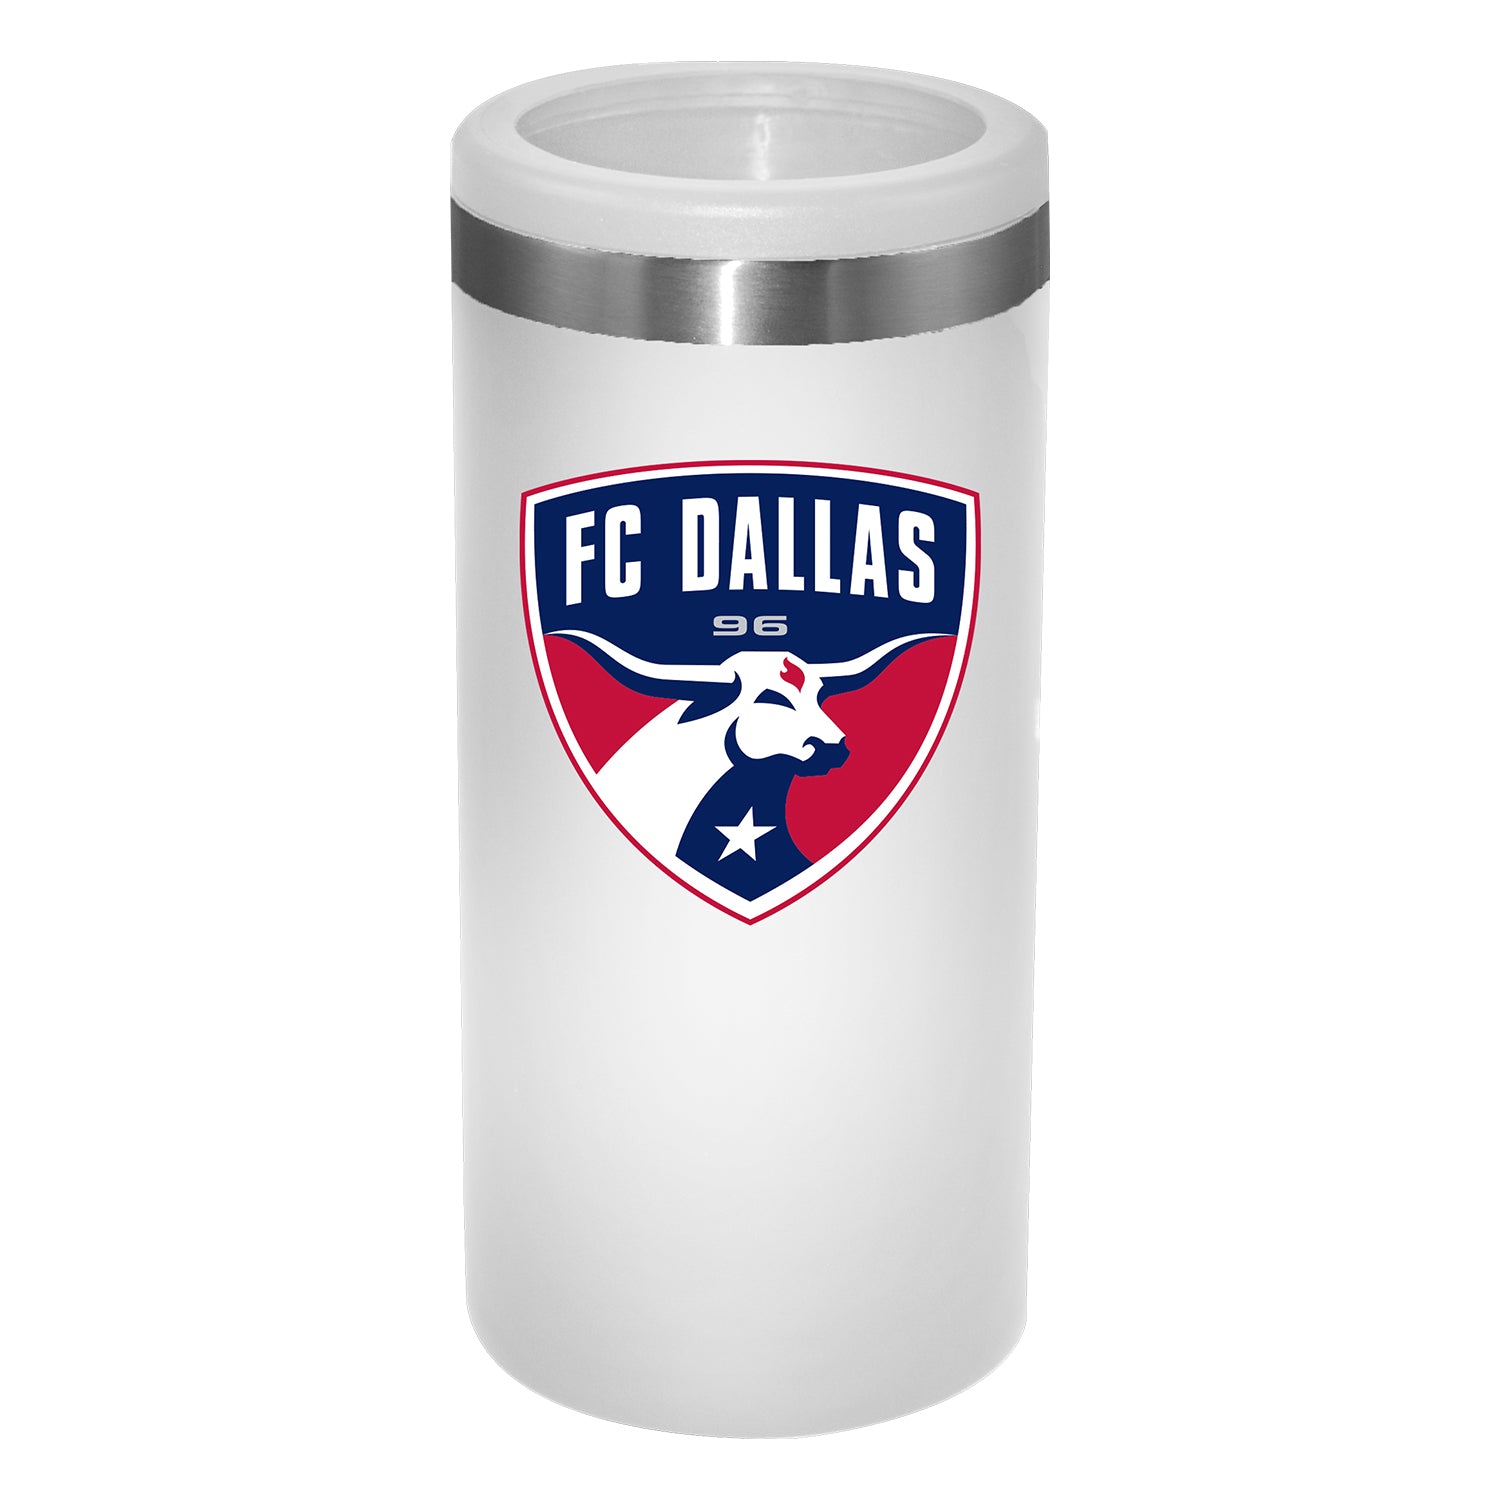 12oz White Slim Can Holder  FC Dallas at $29.99 only from The